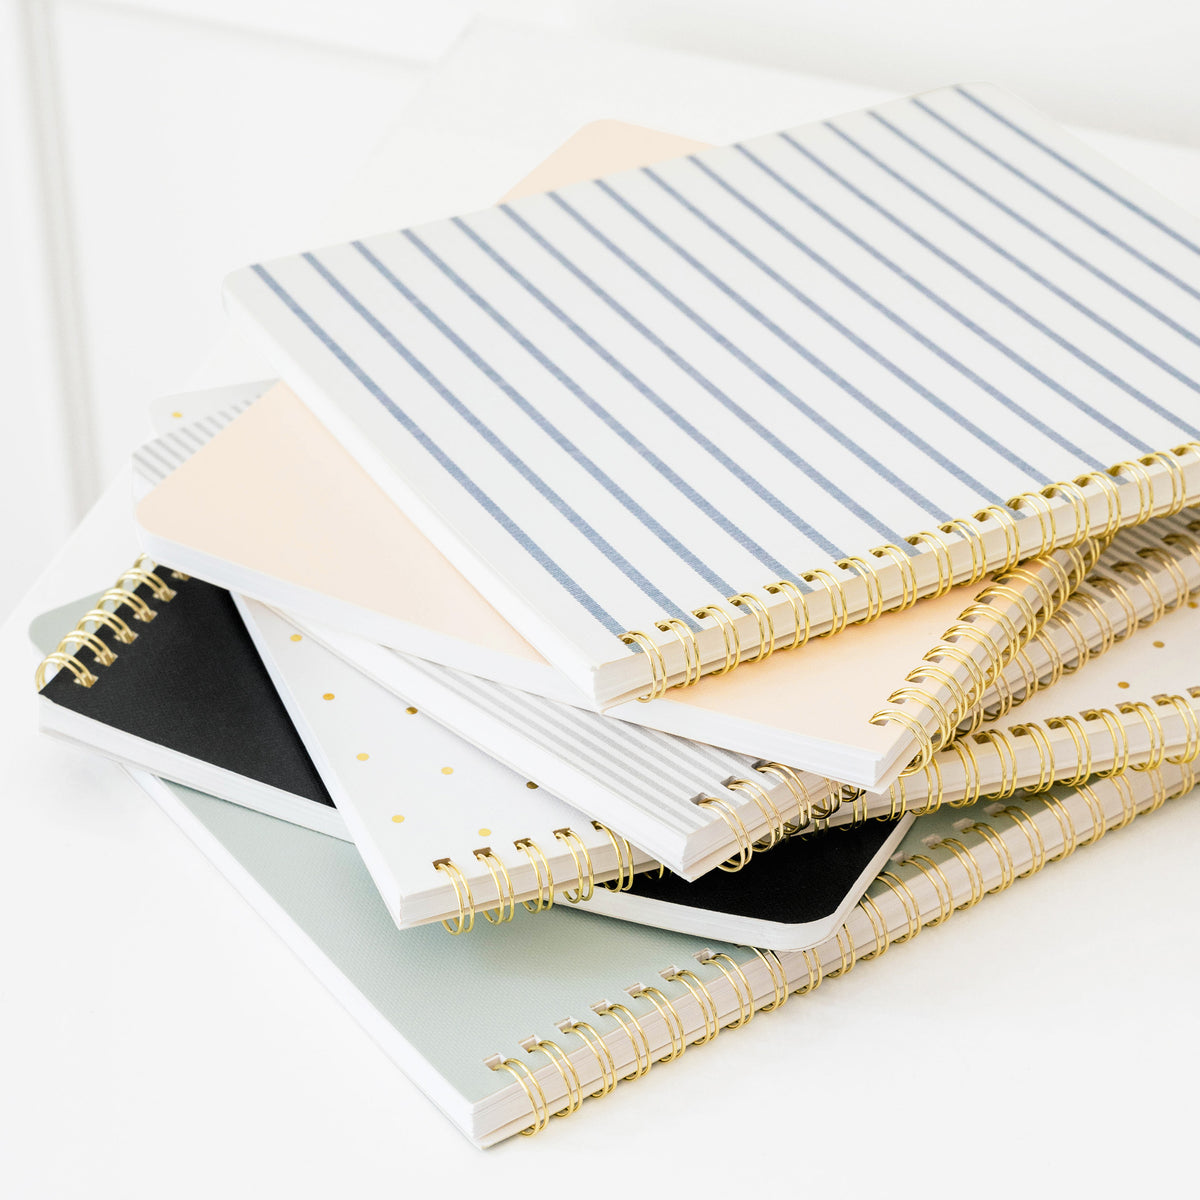 stack of different spiral notebooks in various patterns and colors